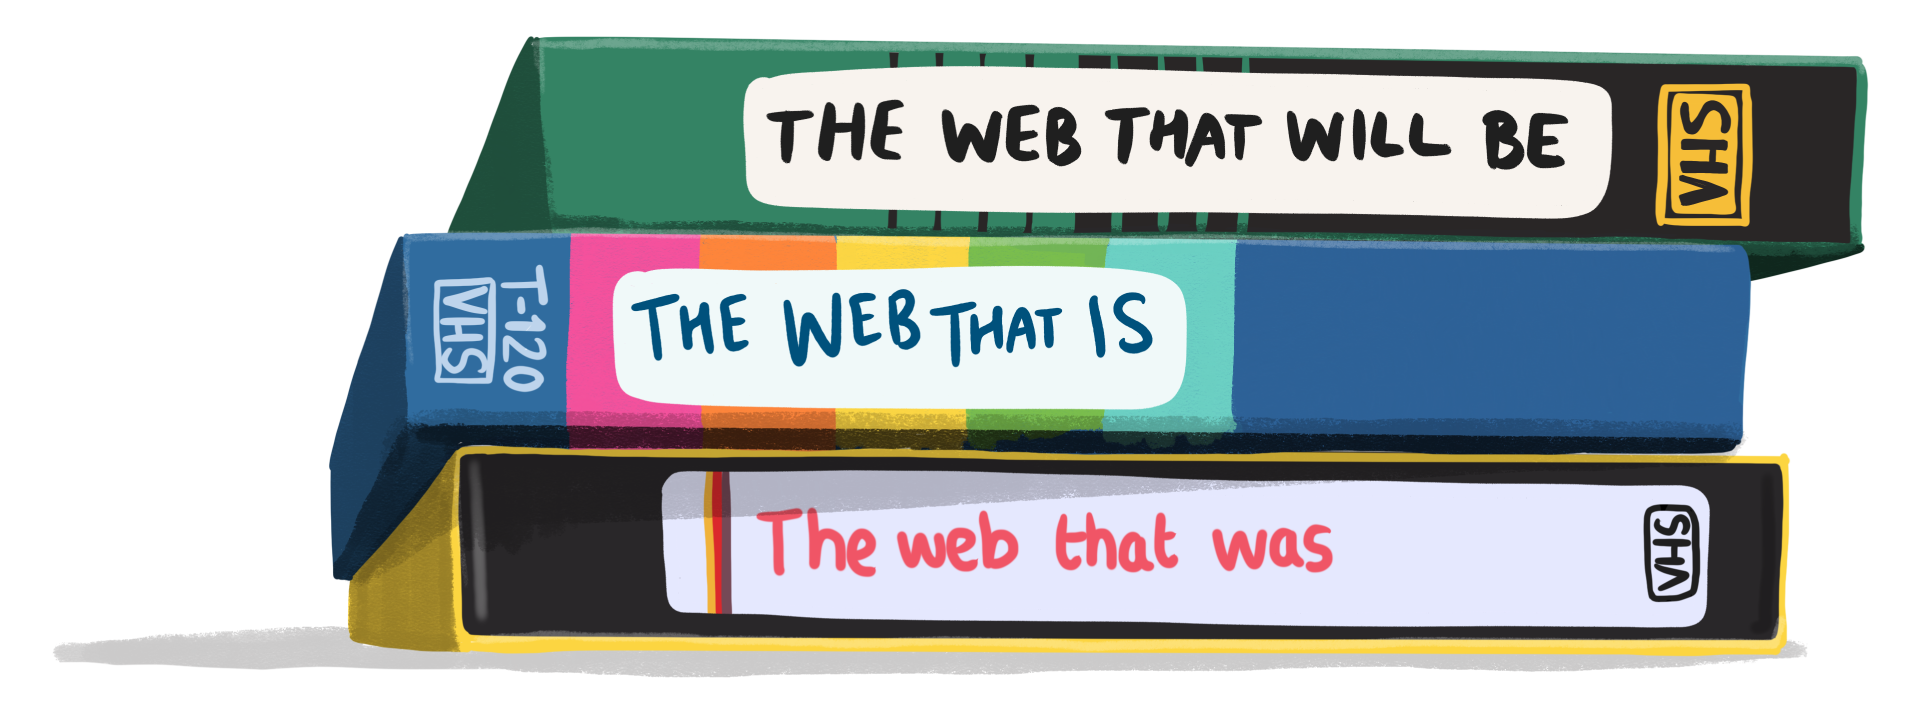 Image of stacked VHS tapes saying "The Web that will be," "The Web that Is," and "The web that was"